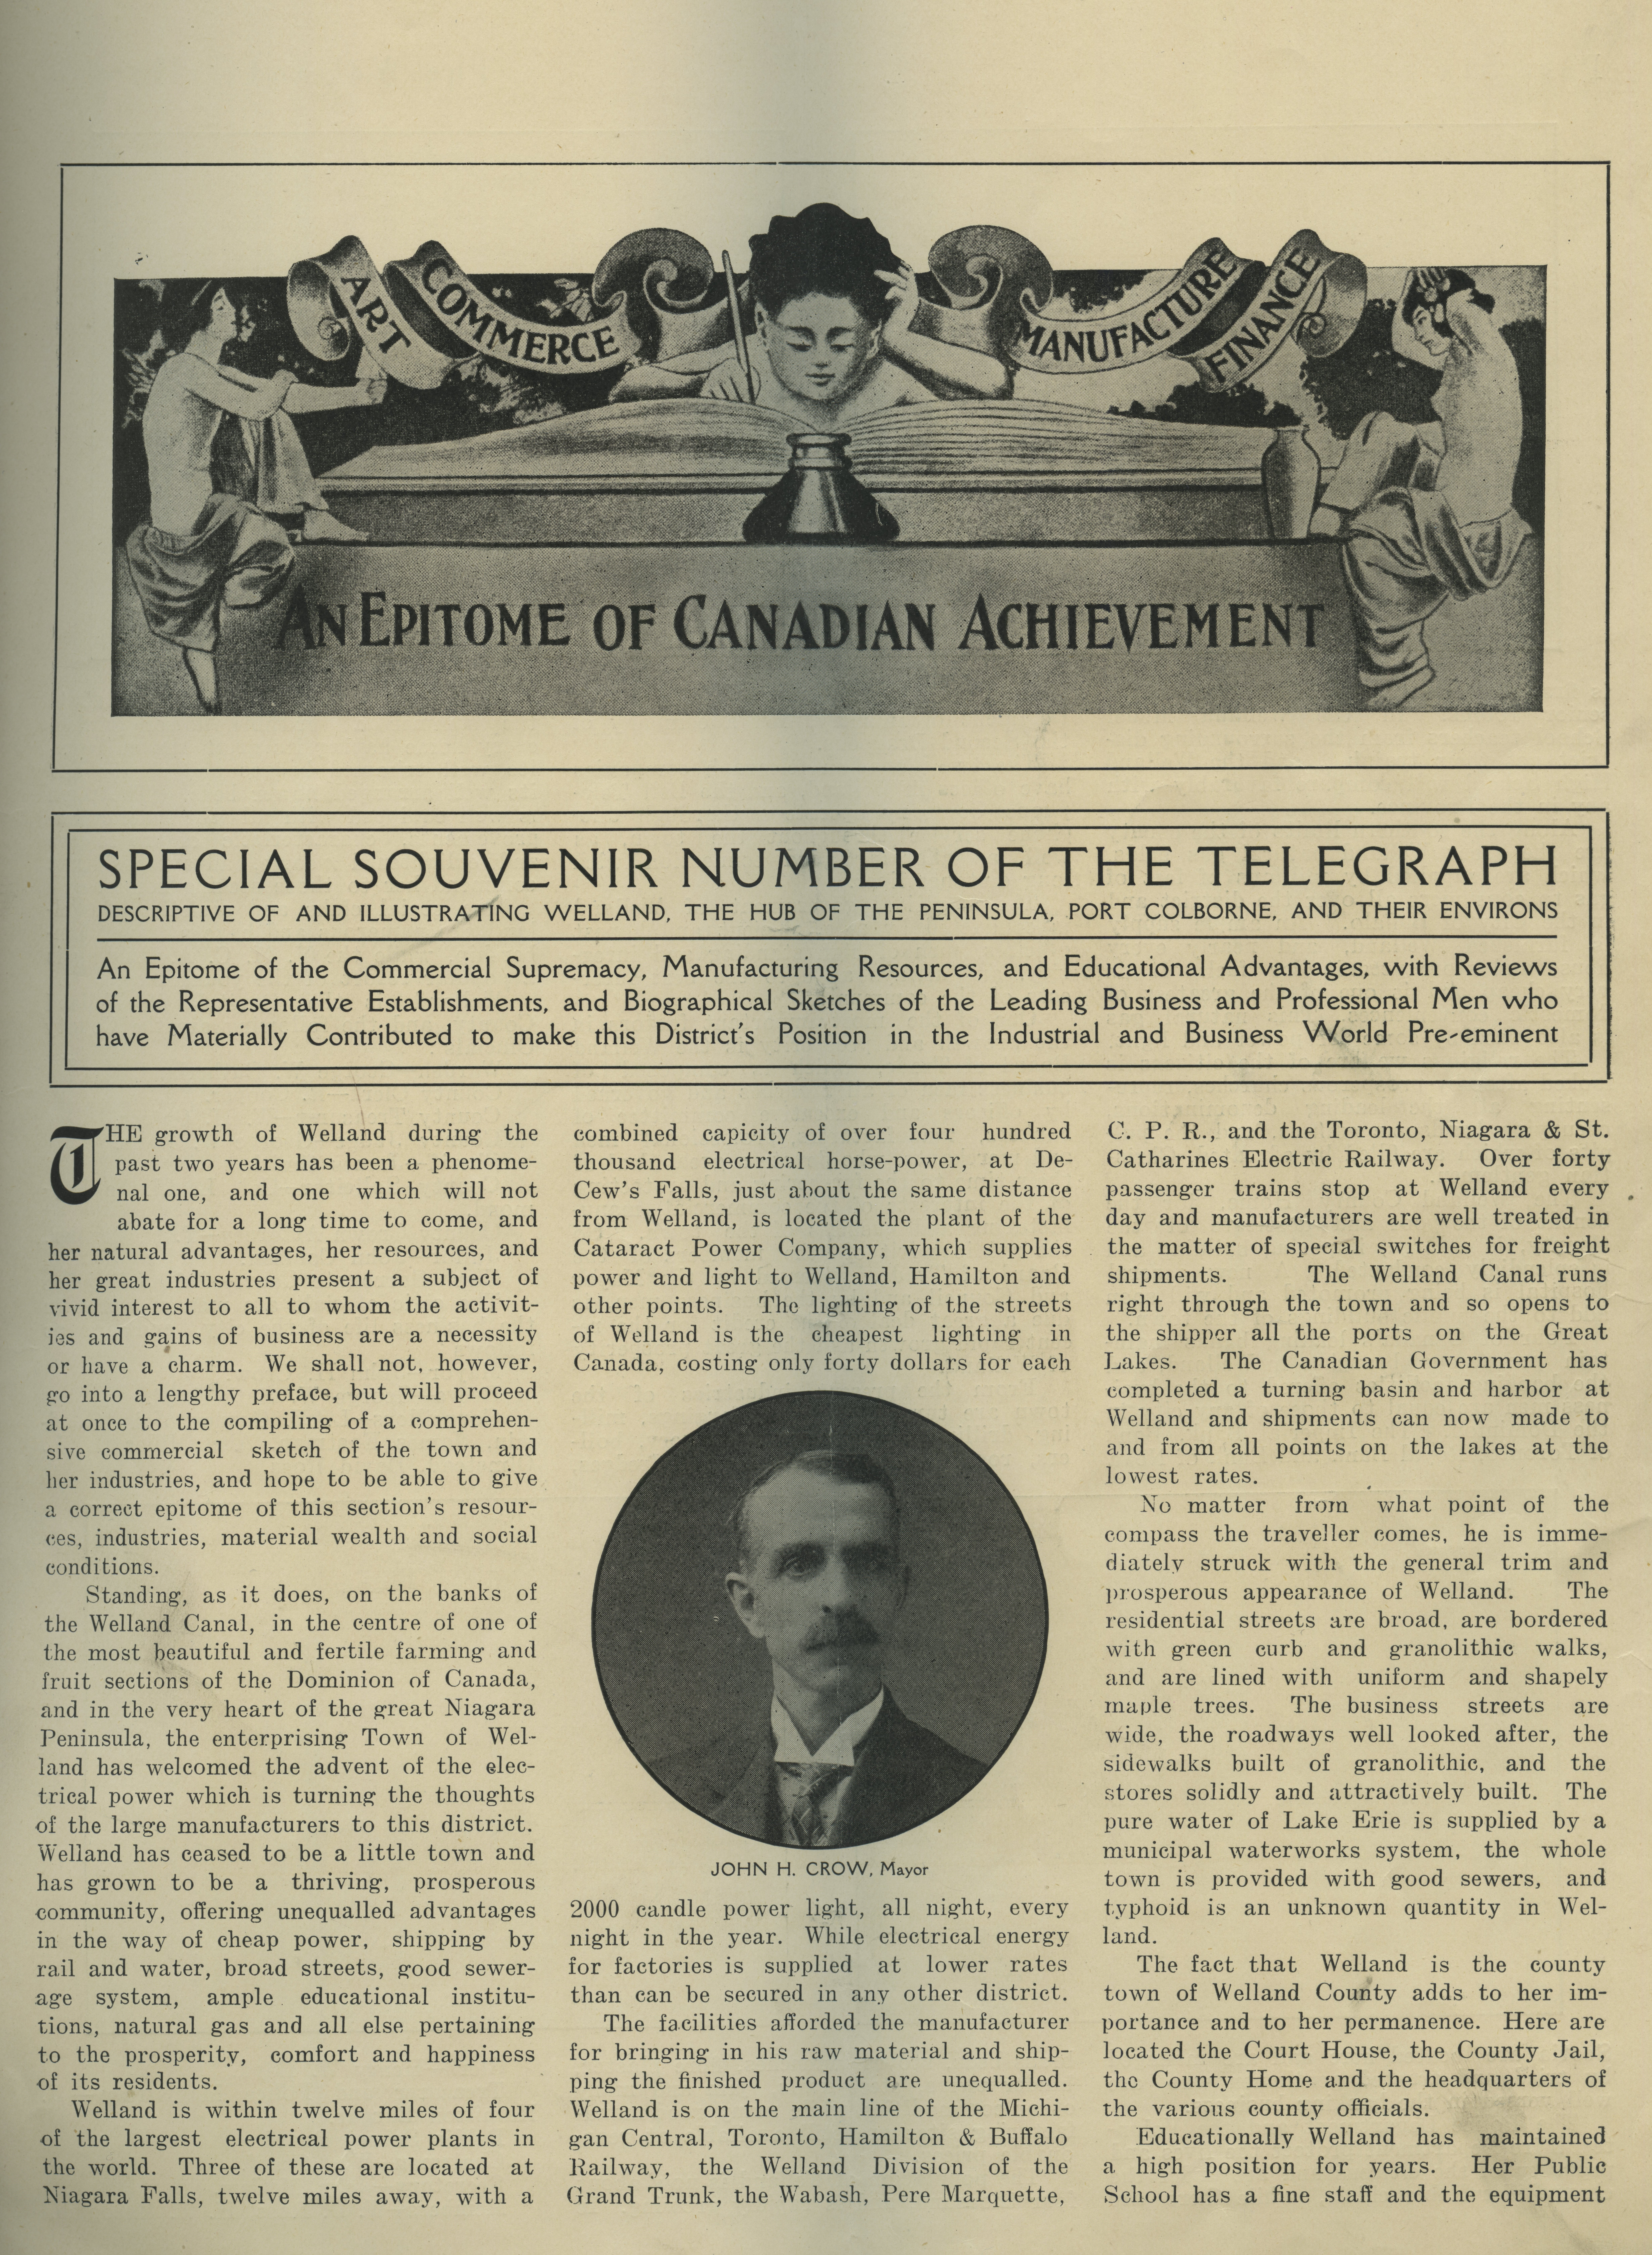 An old page of promotional material. The title reads "Special souvenir number of the telegraph" and there is an old black and white portrait of a man.